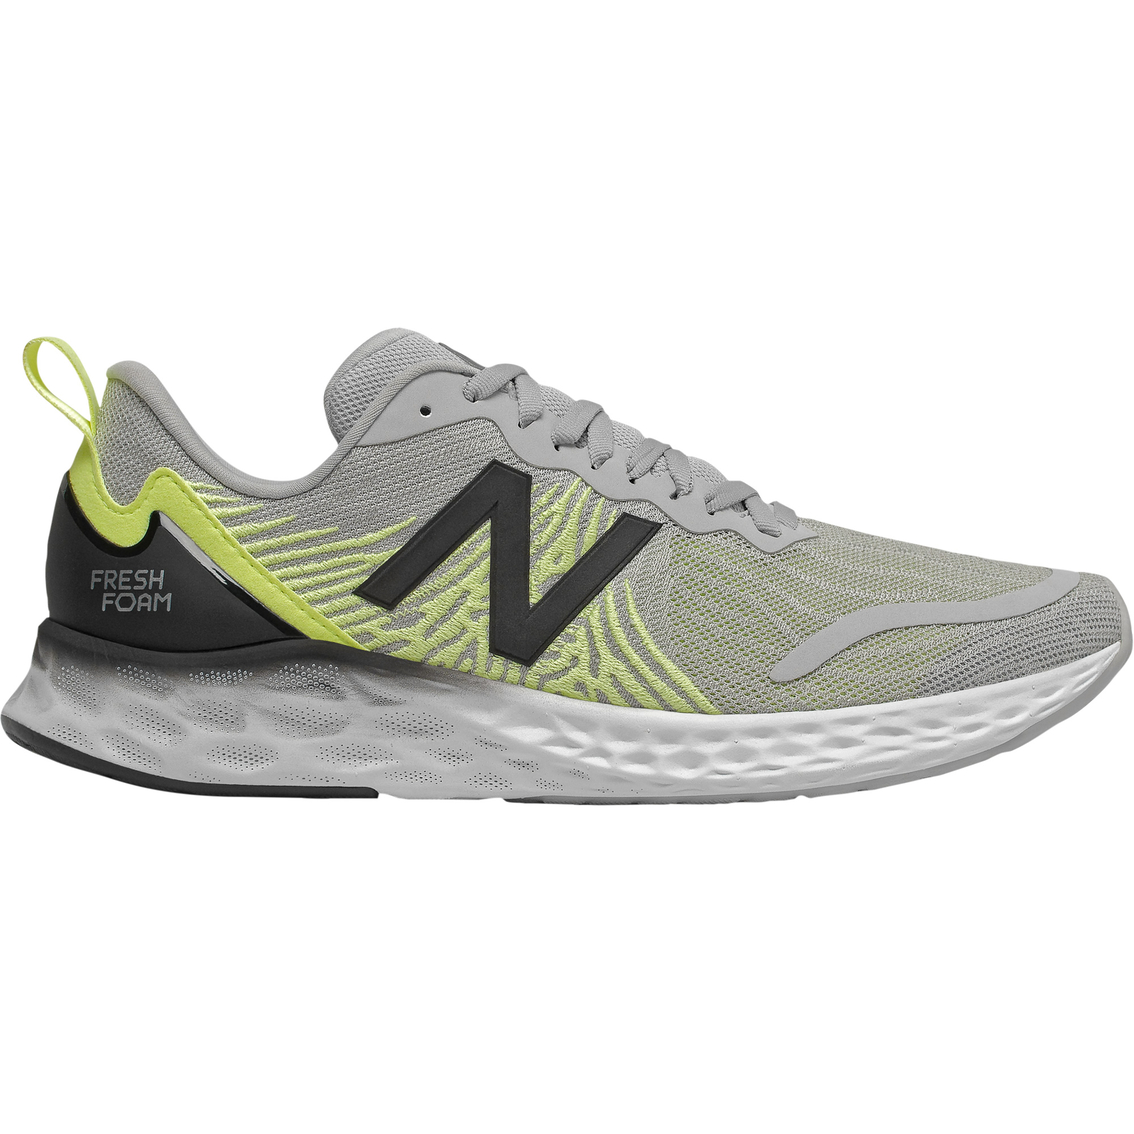 New Balance Men's Mtmpogy Tempo Running Shoes | Men's Athletic Shoes ...